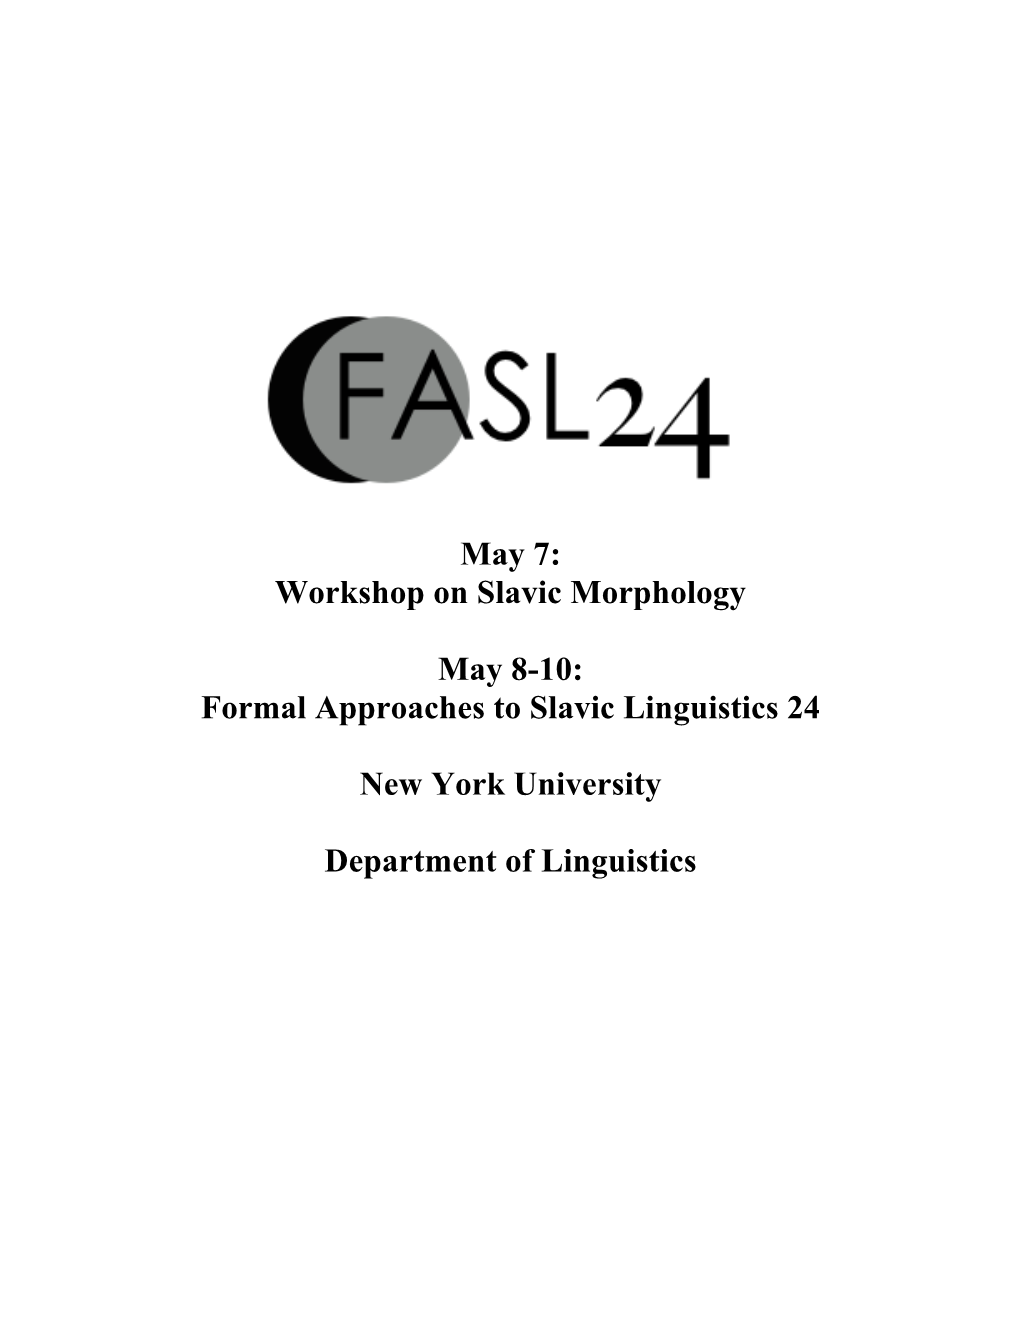 Formal Approaches to Slavic Linguistics 24 New York